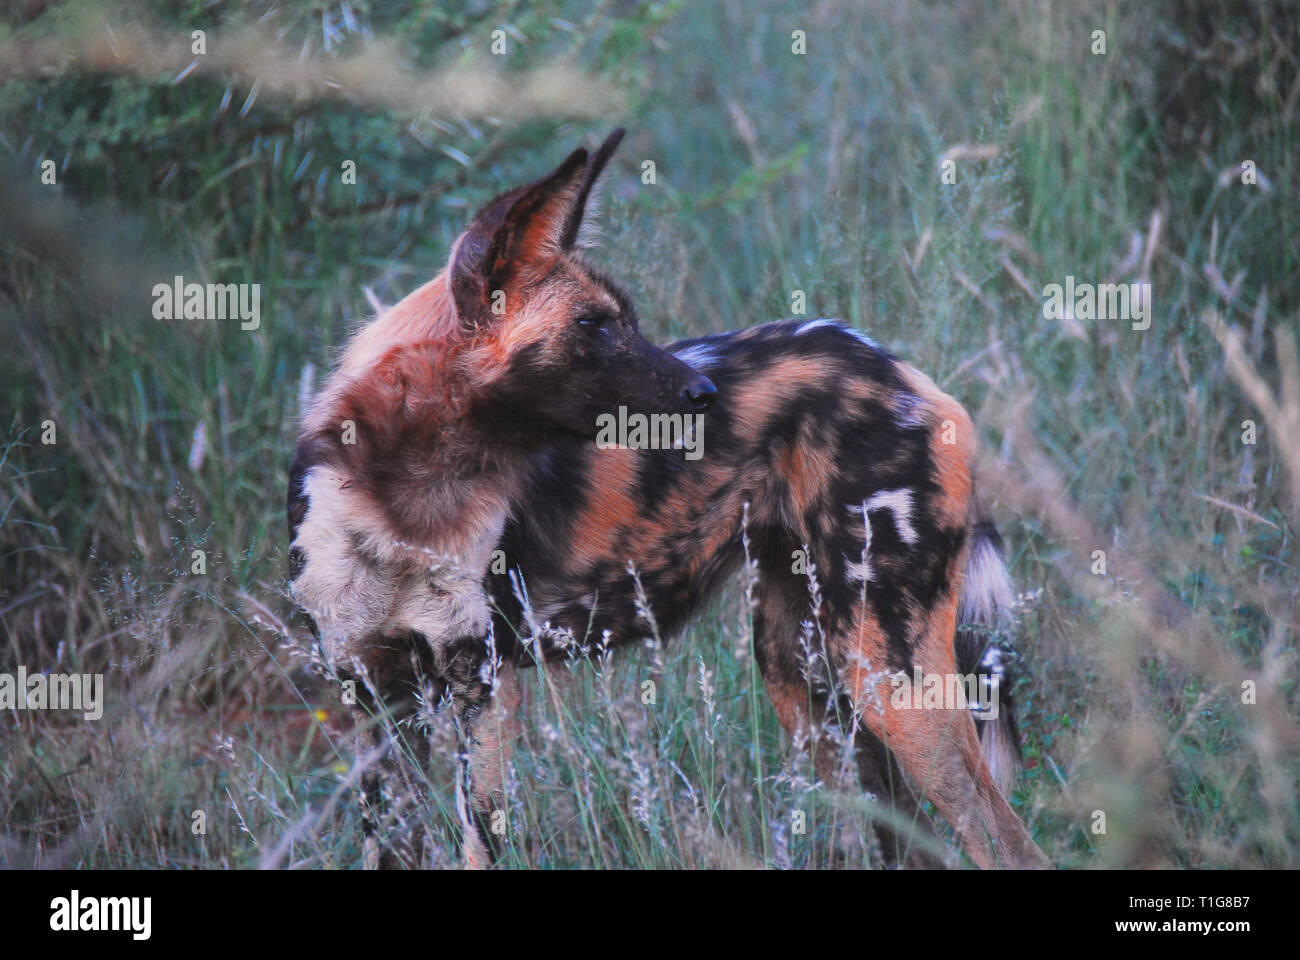 A member of a pack of colorful wild dogs on the hunt.  On alert, this one glanced quickly over its shoulder.  Photographed while on safari in Northern Stock Photo